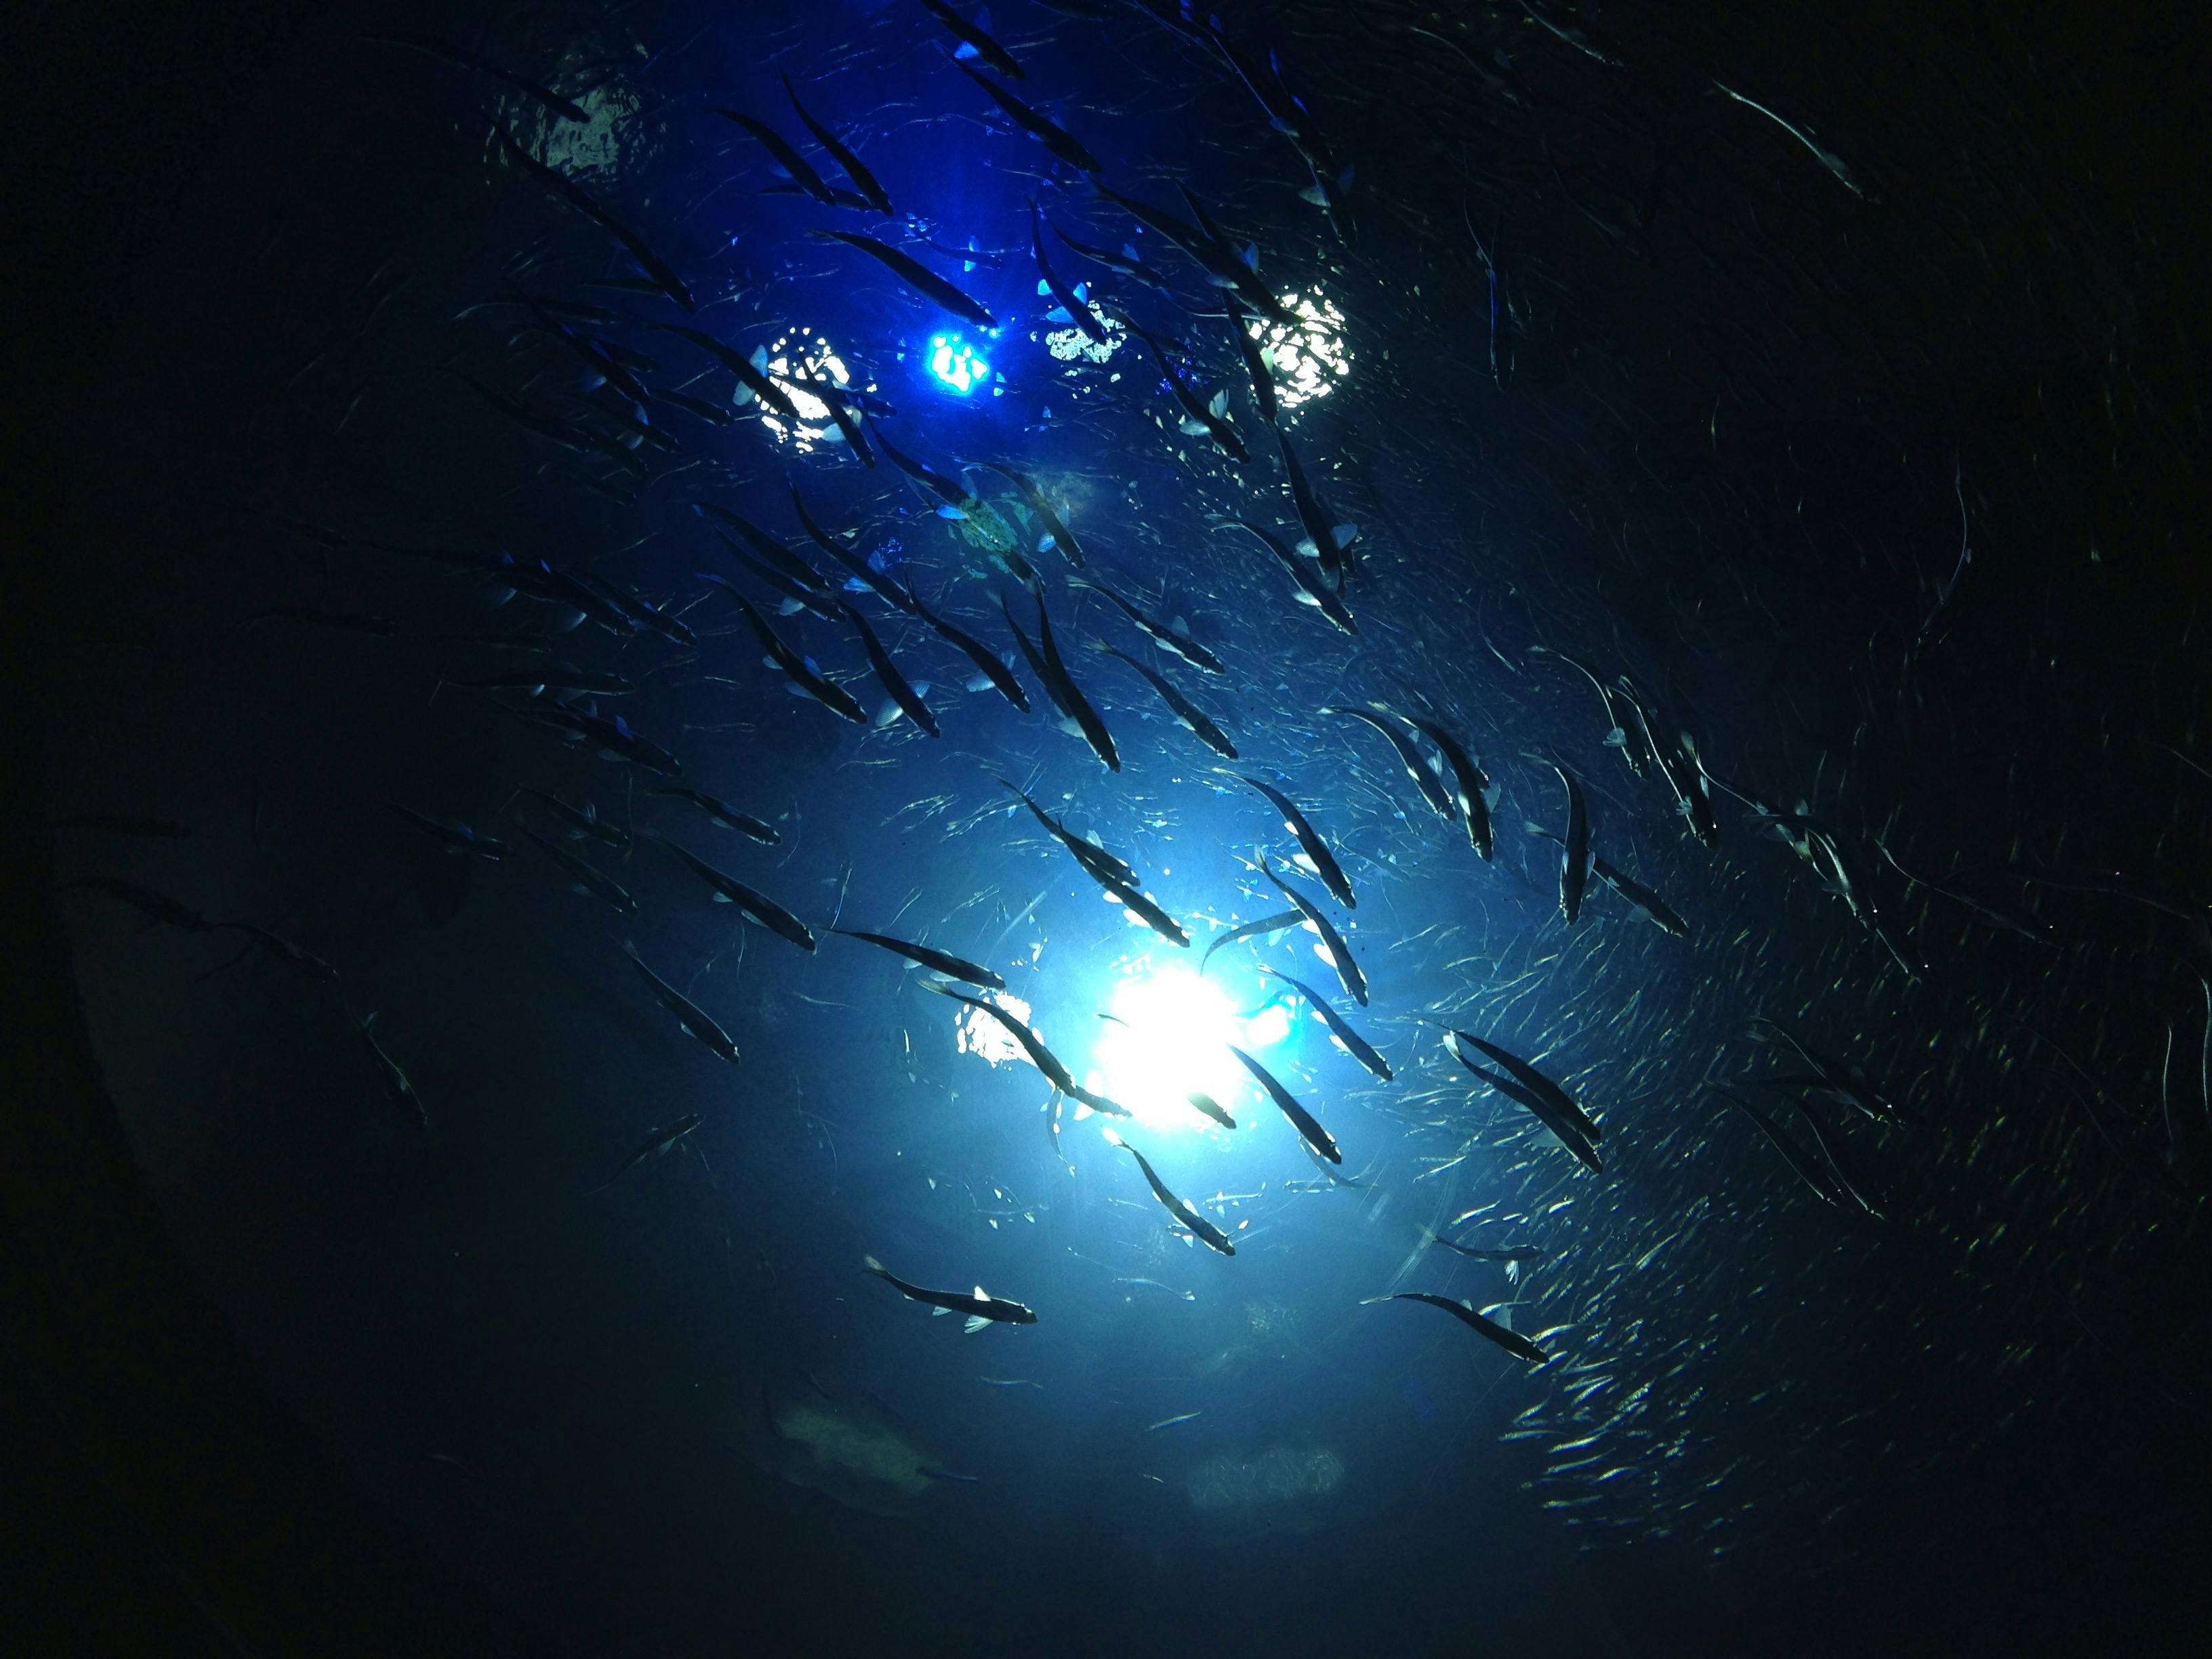 Fish swimming through partially lit water as seen from underneath an aquarium.